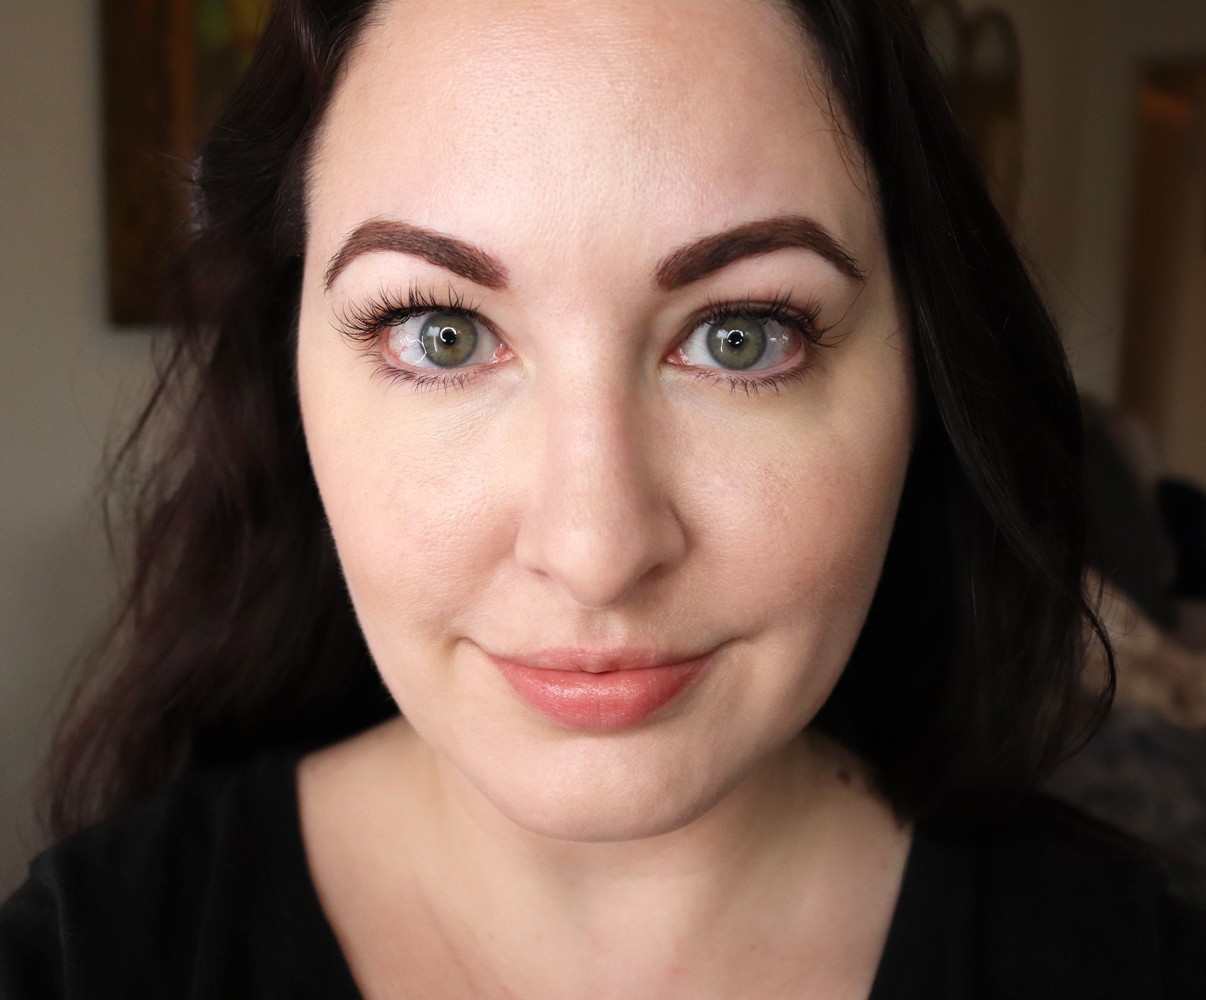 Contours Rx 7 mm Eyelid Tape for Hooded Eyes Review and Giveaway by popular Los Angeles cruelty free beauty blogger My Beauty Bunny